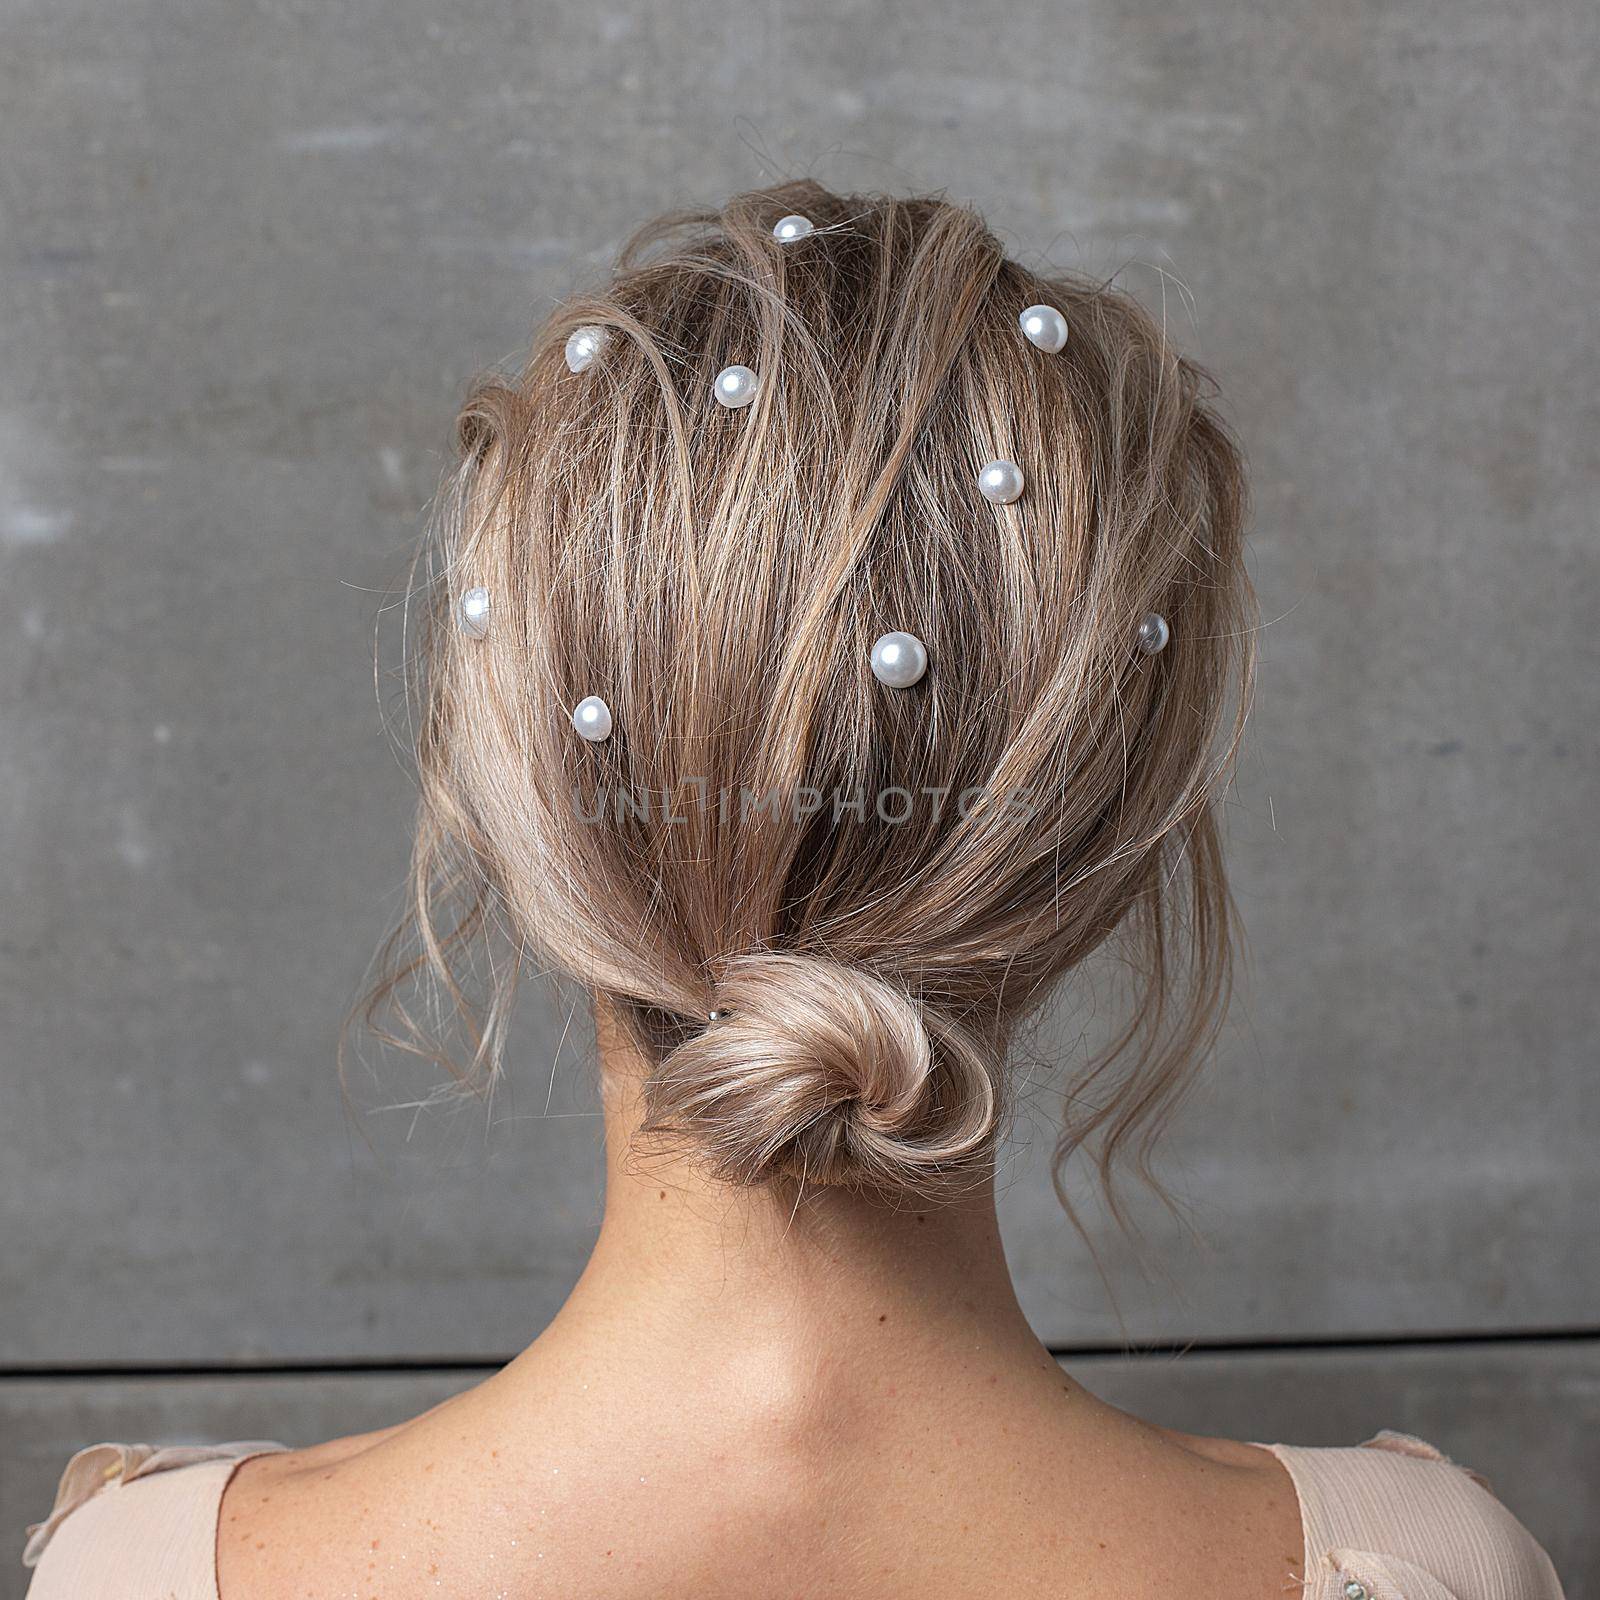 girl with pearl in hair against gray wall, rear view closeup. fashion hairstyle by artemzatsepilin